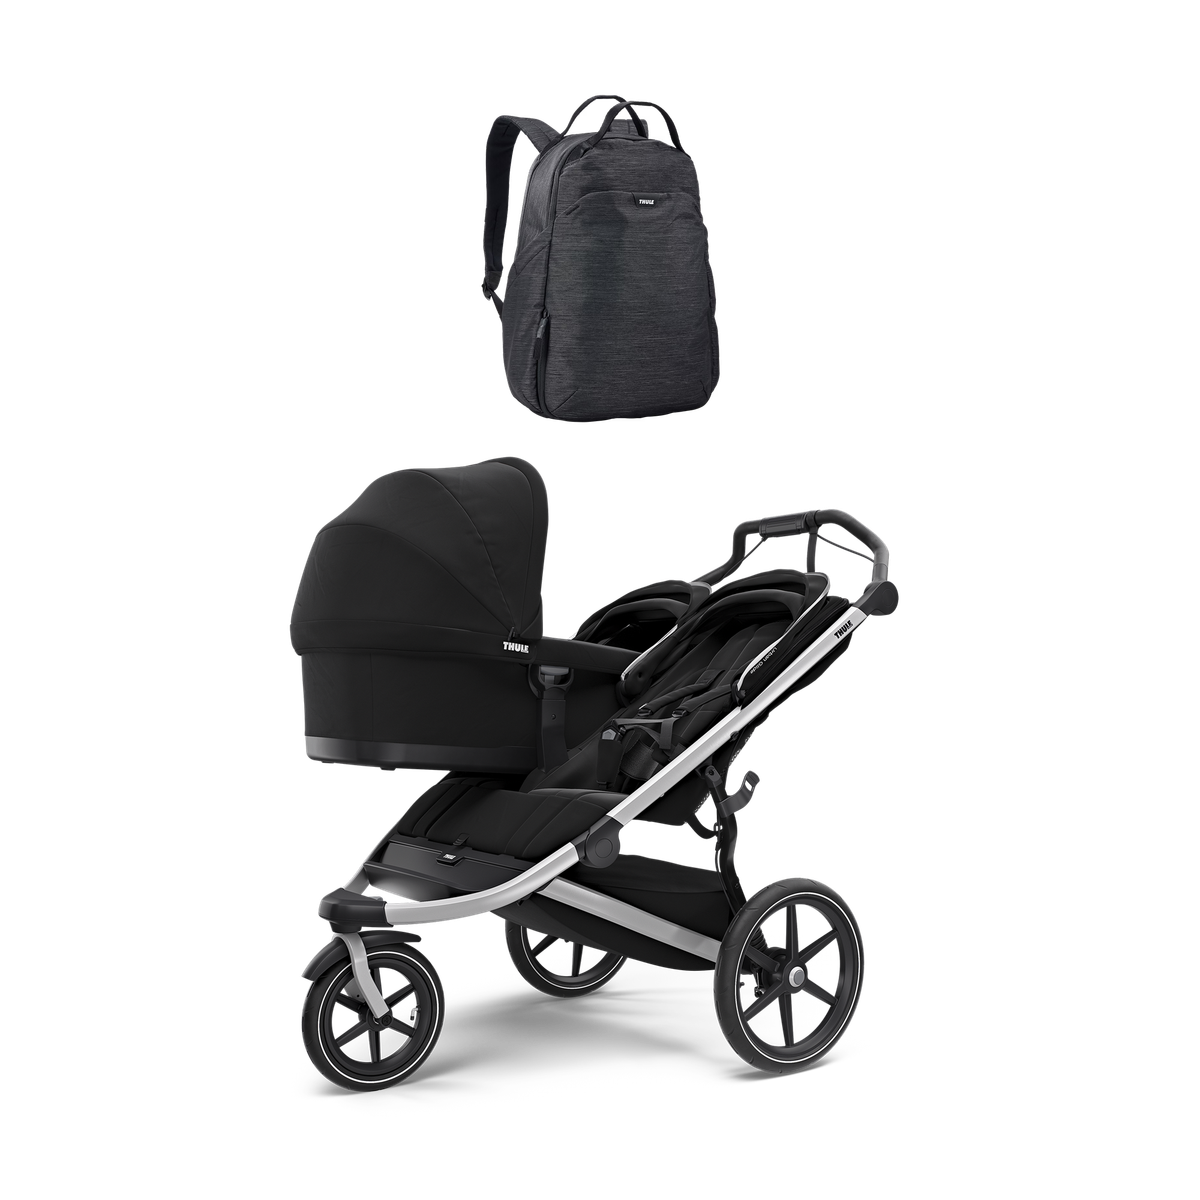 Thule Urban Glide 2 Double + Thule Changing Backpack + Thule Urban Glide Bassinet